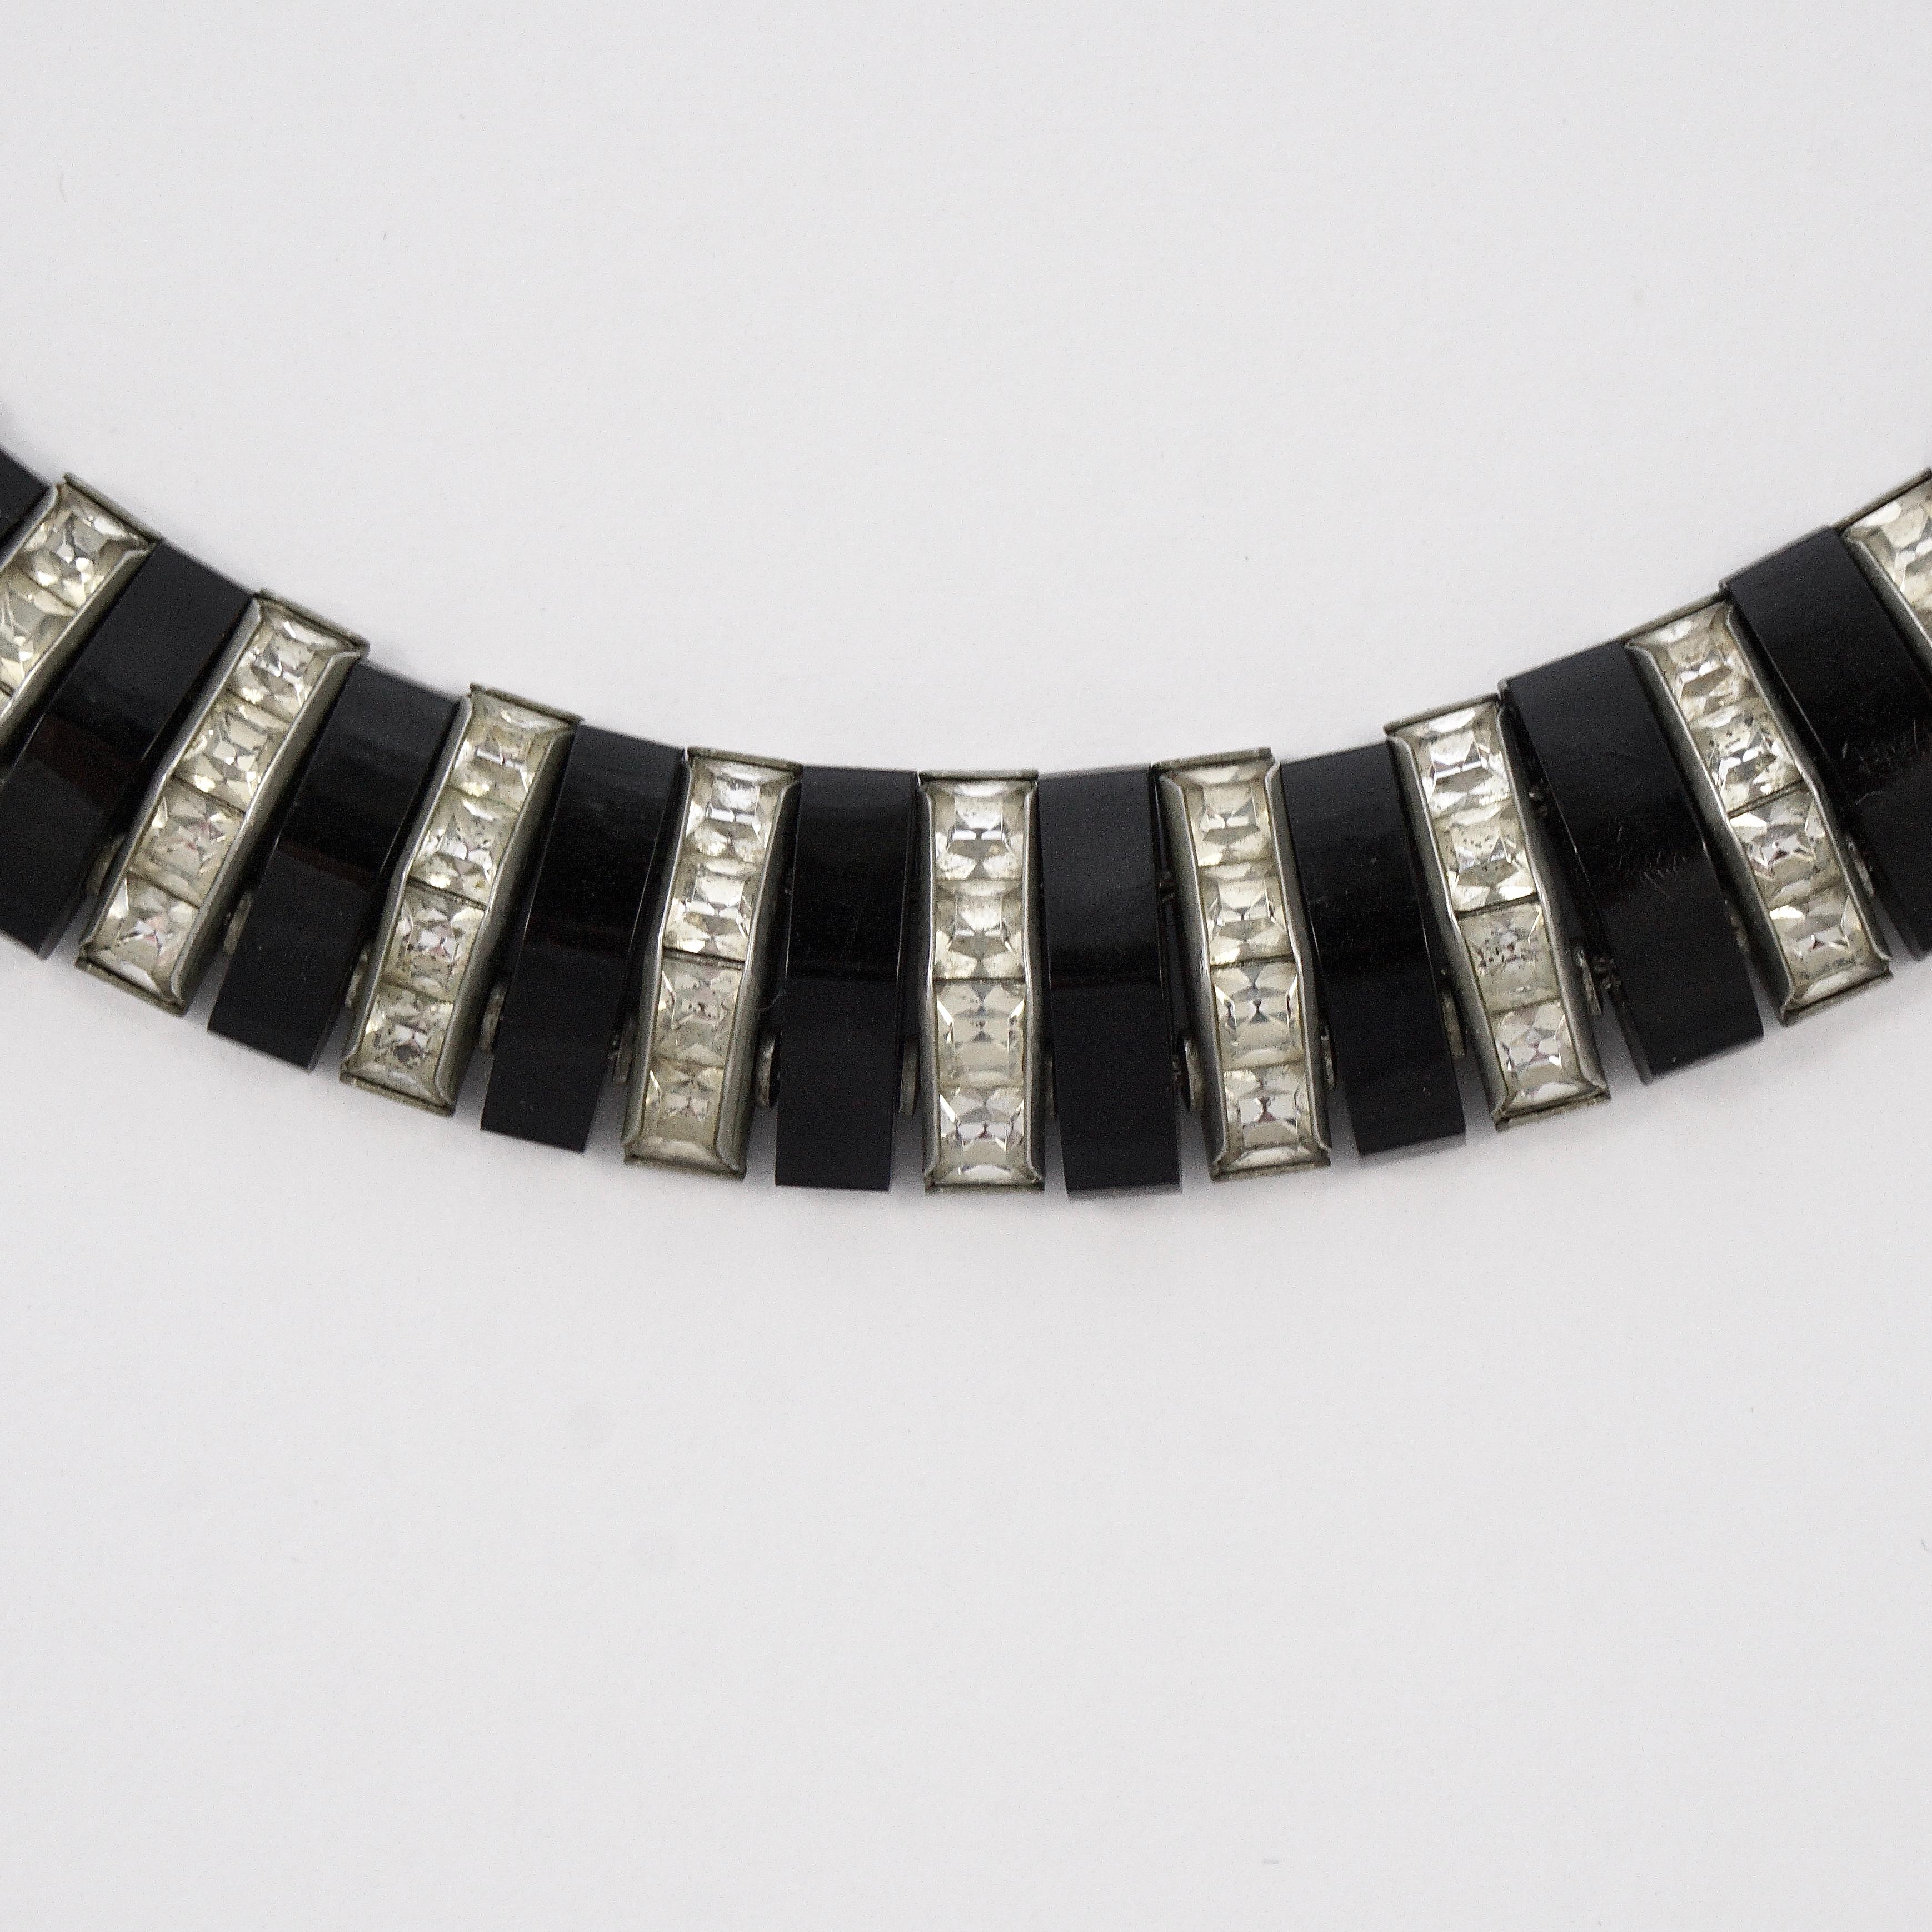 Fabulous silver tone original Art Deco necklace featuring channel set rhinestones and black bakelite. The rhinestones and black bakelite are separated by metal beads, to create the curve to go around the neck. The necklace has the German stamp DoSo,